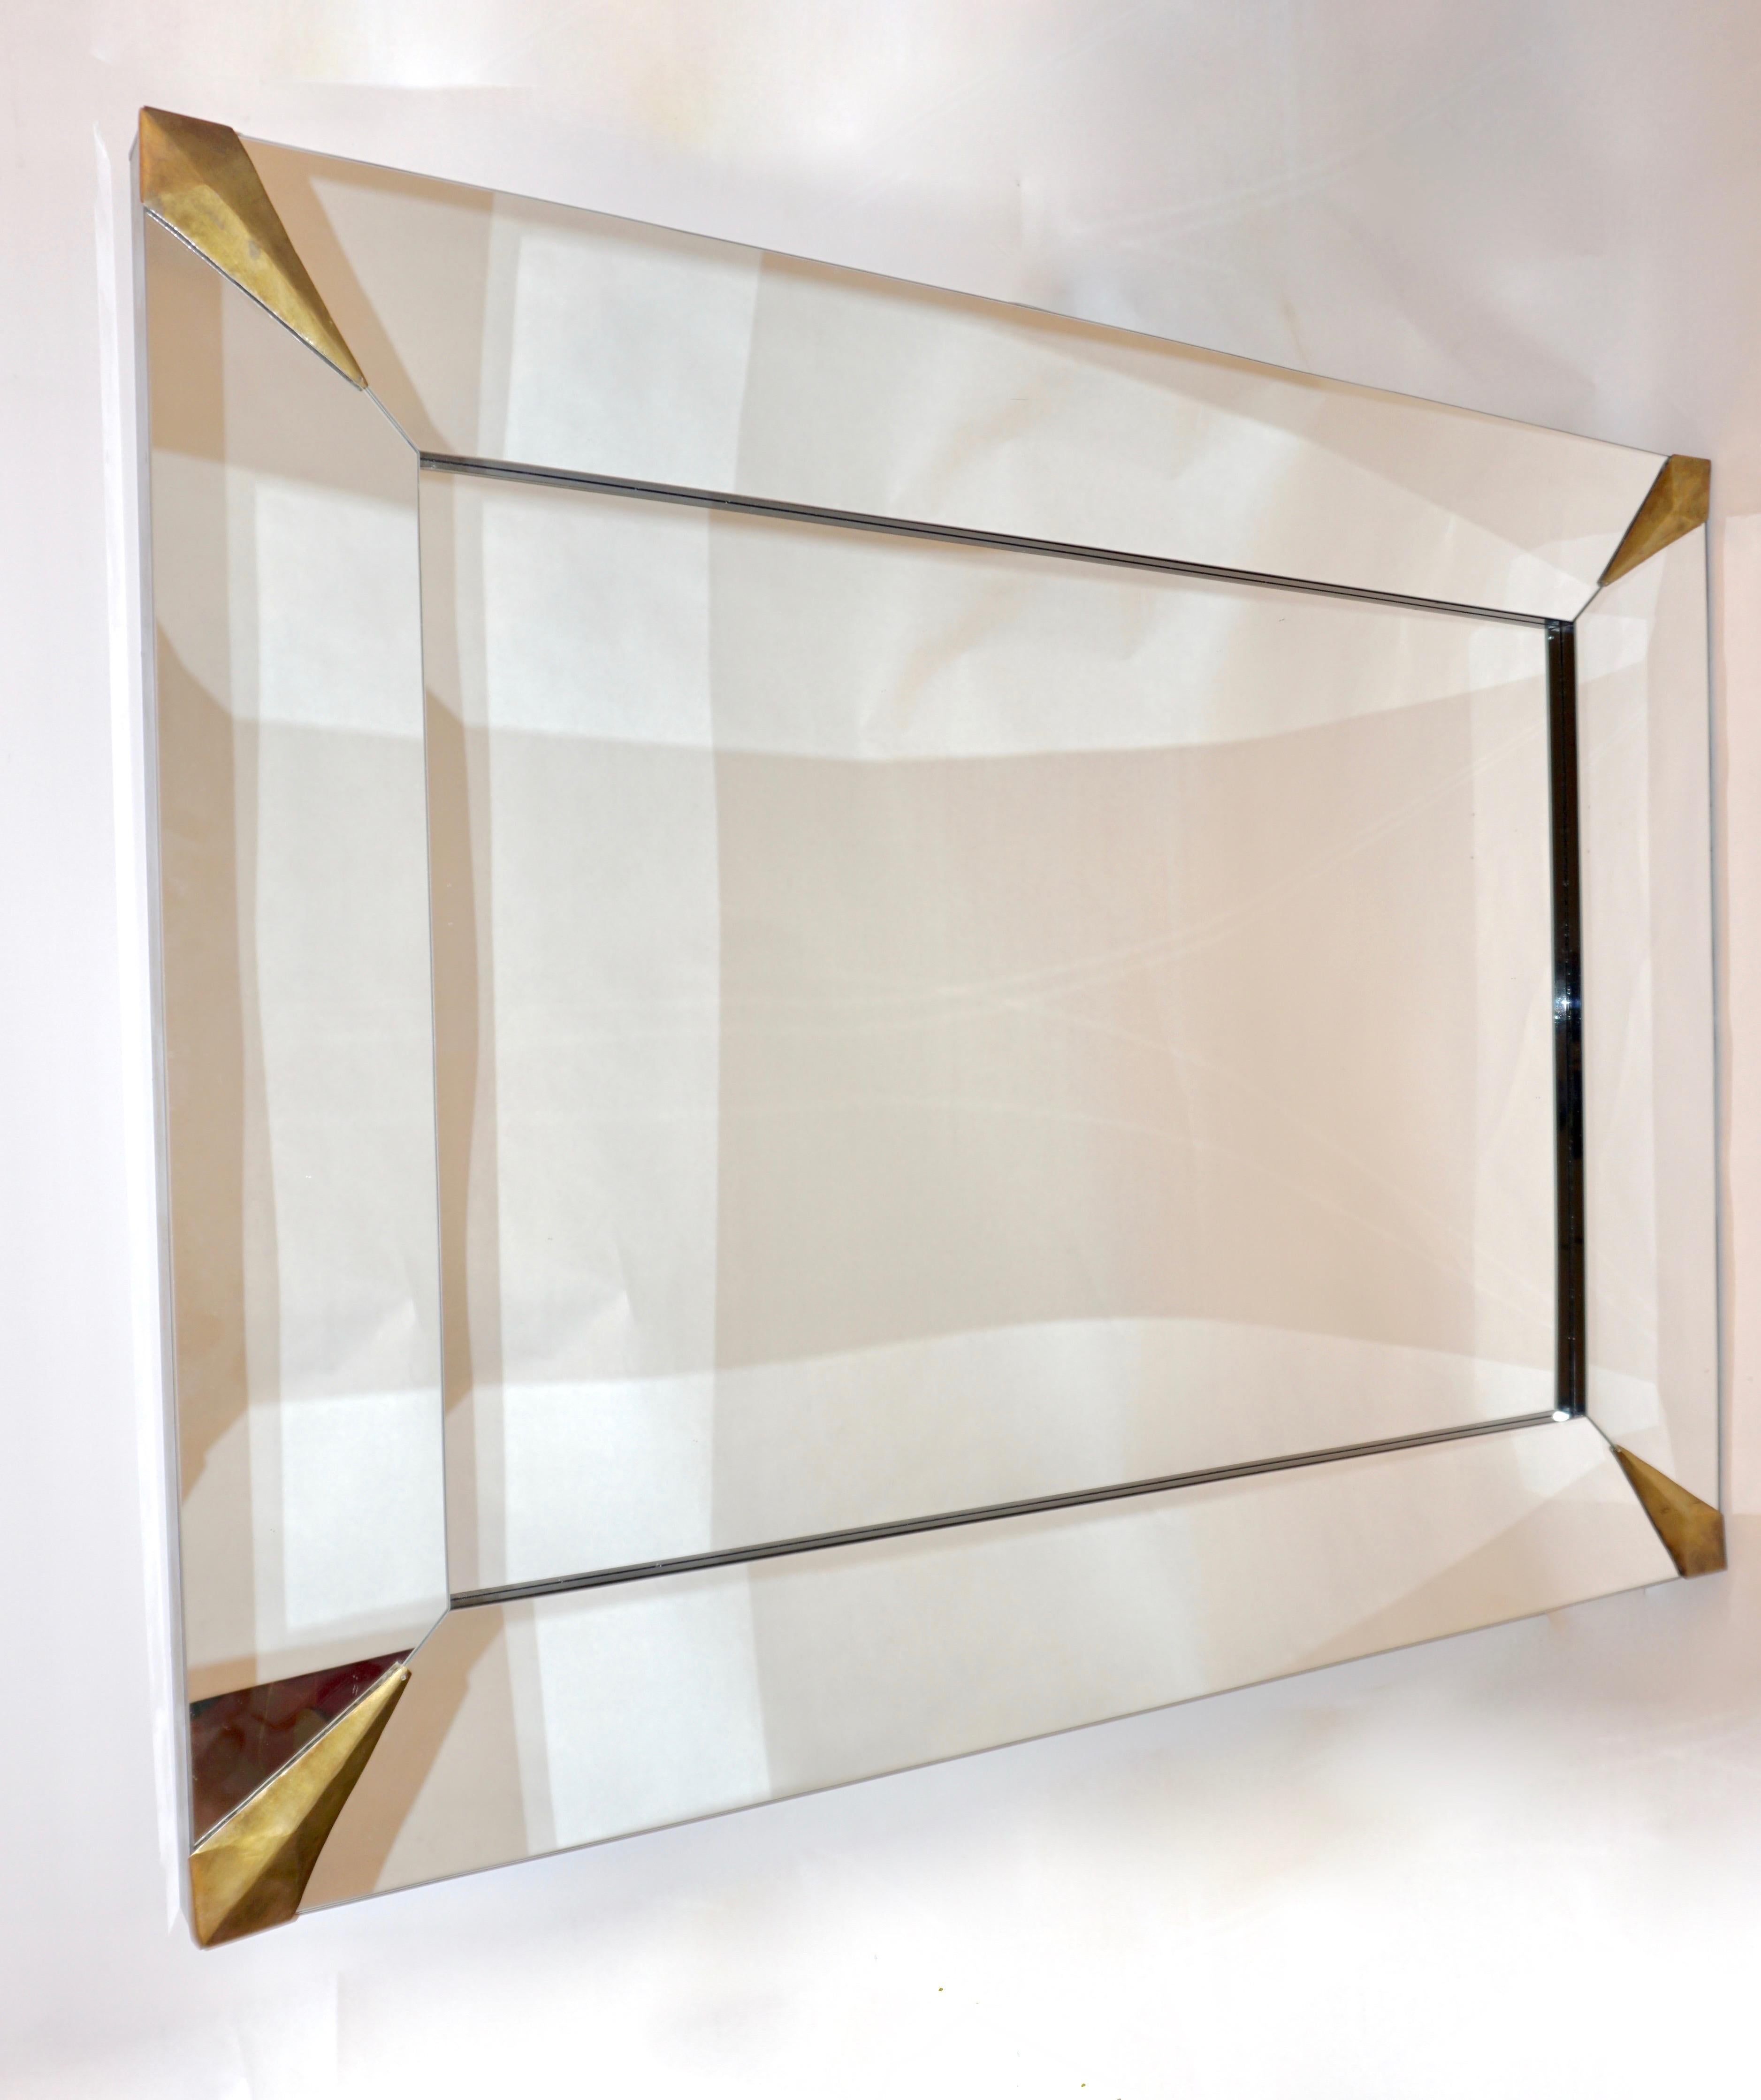 1960s Italian Mid-Century Modern rectangular mirror, entirely handmade with handcrafted and hammered brass corner mounts. High quality of construction with the sides highlighted by a black Murano glass border all the way round as well as the inside